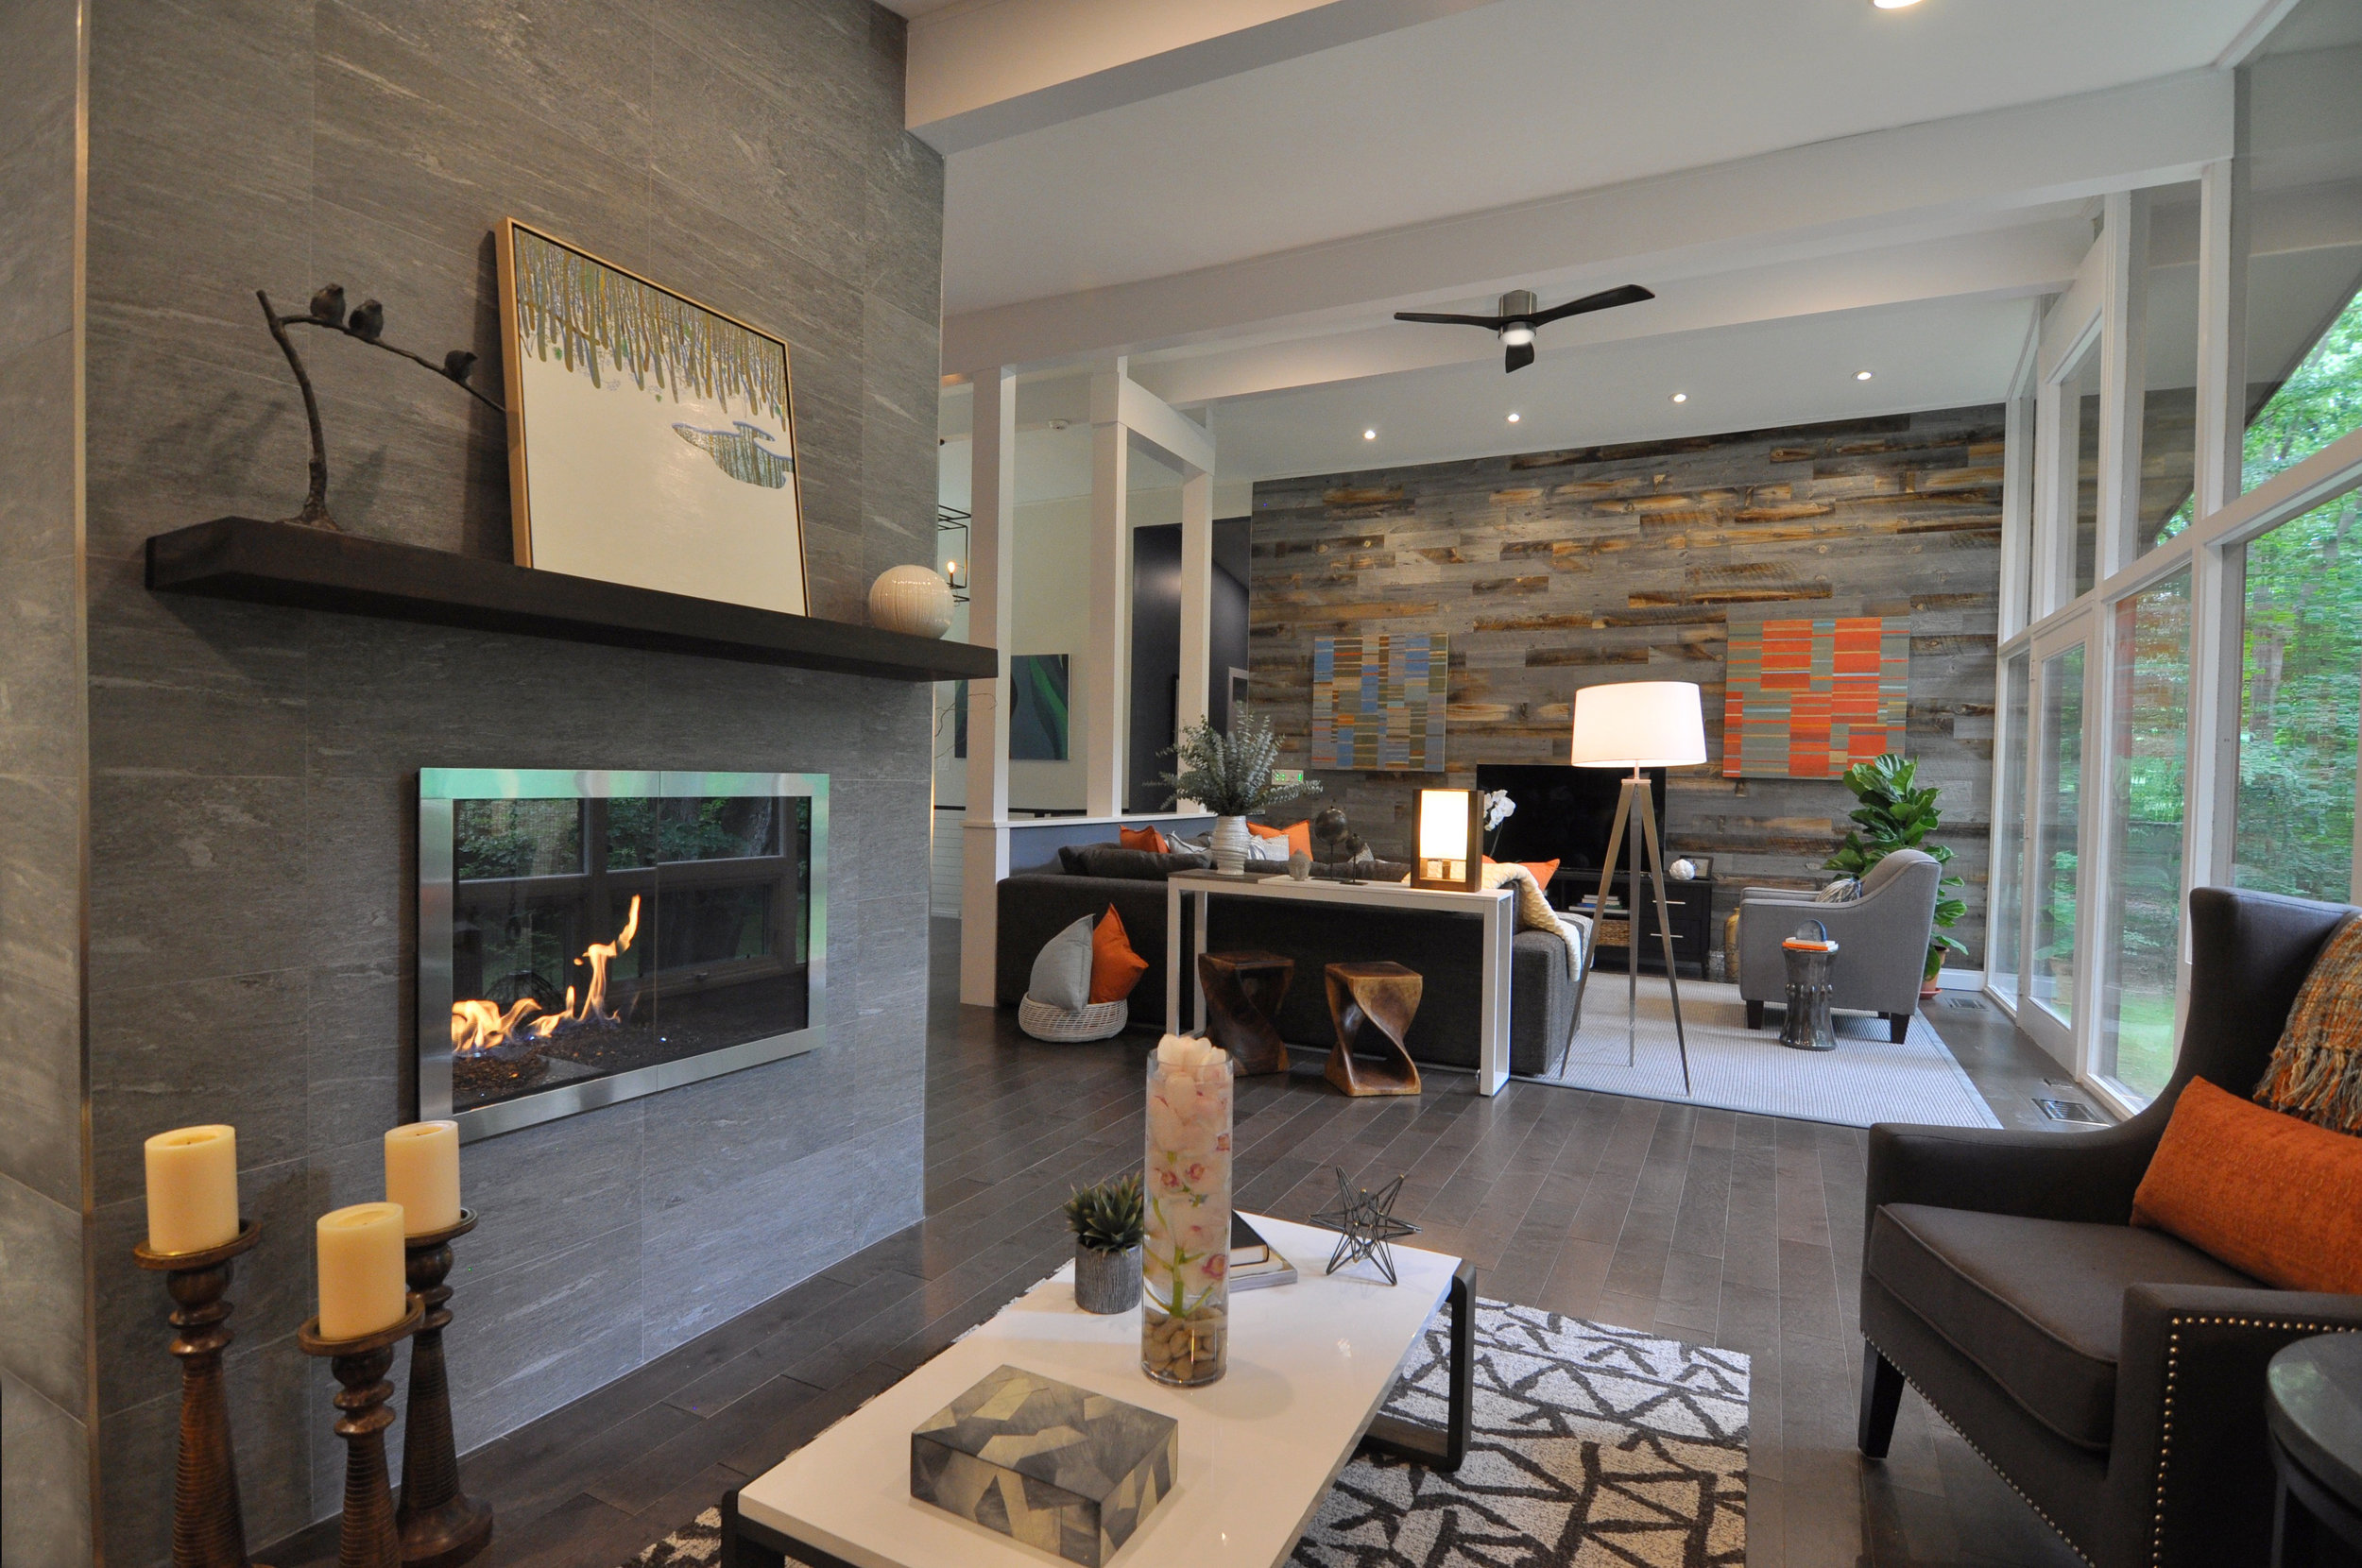 Kim A Mitchell_Design Lead_HGTV_The Property Brothers_Family Room_Tile Fireplace Facade_Gas Fireplace_2017.jpg